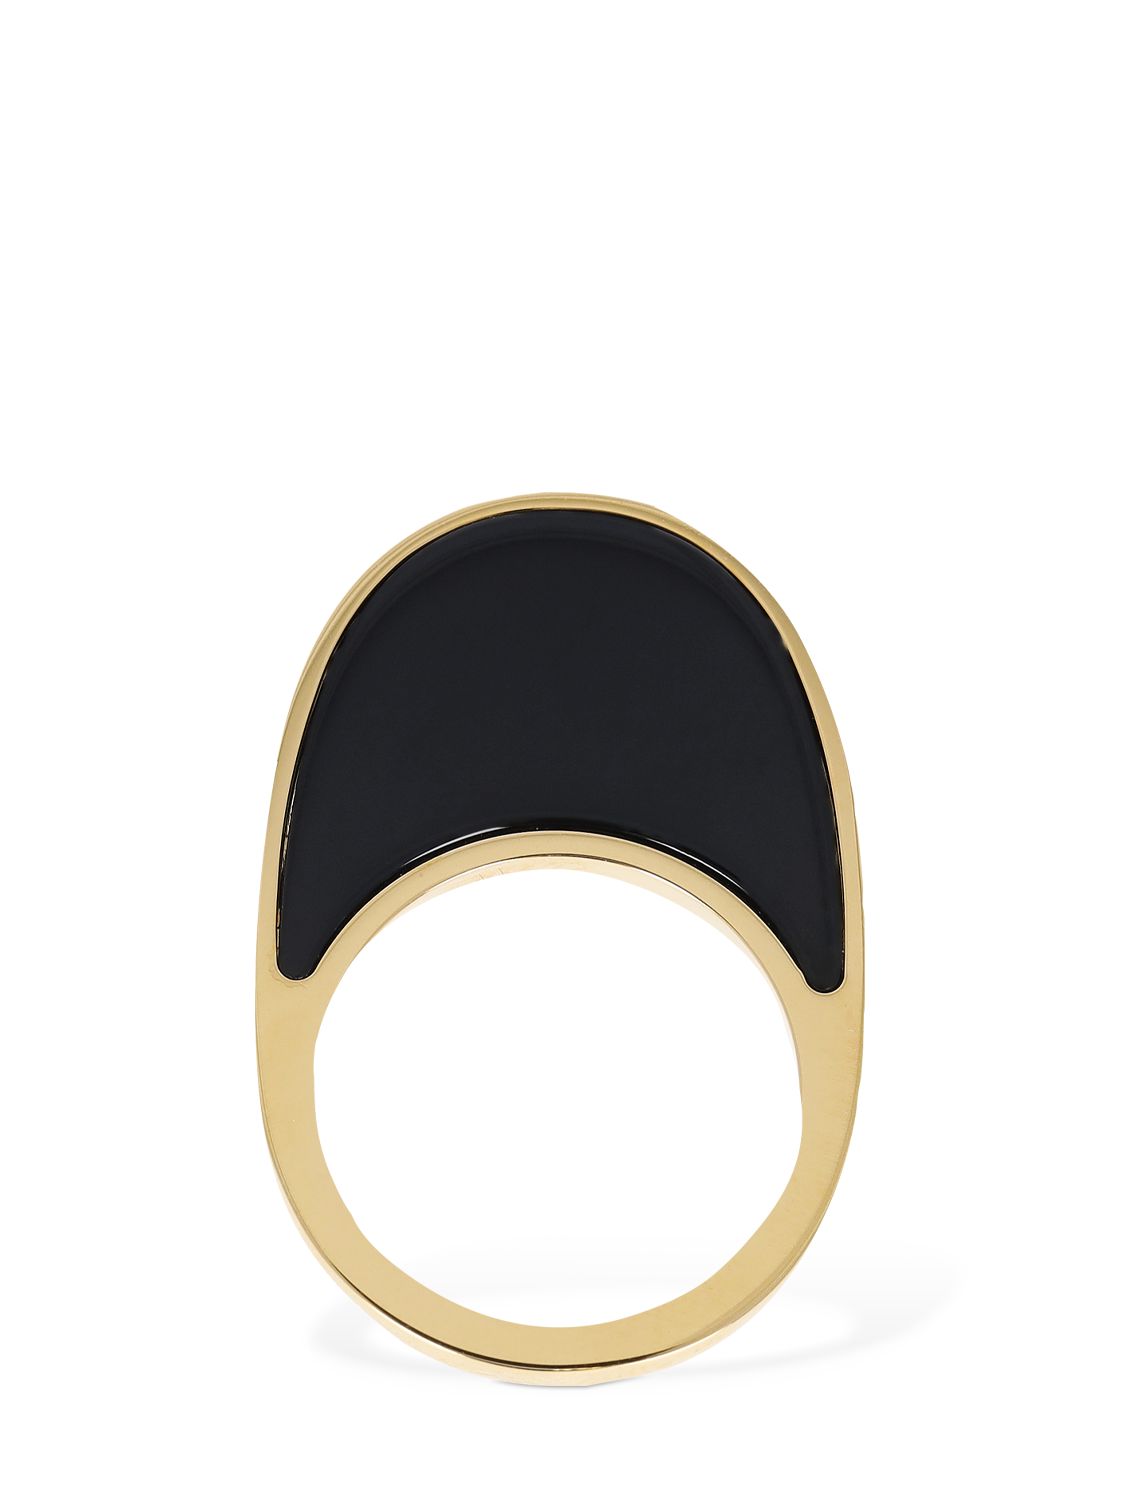 Swipe Lacquered Ring